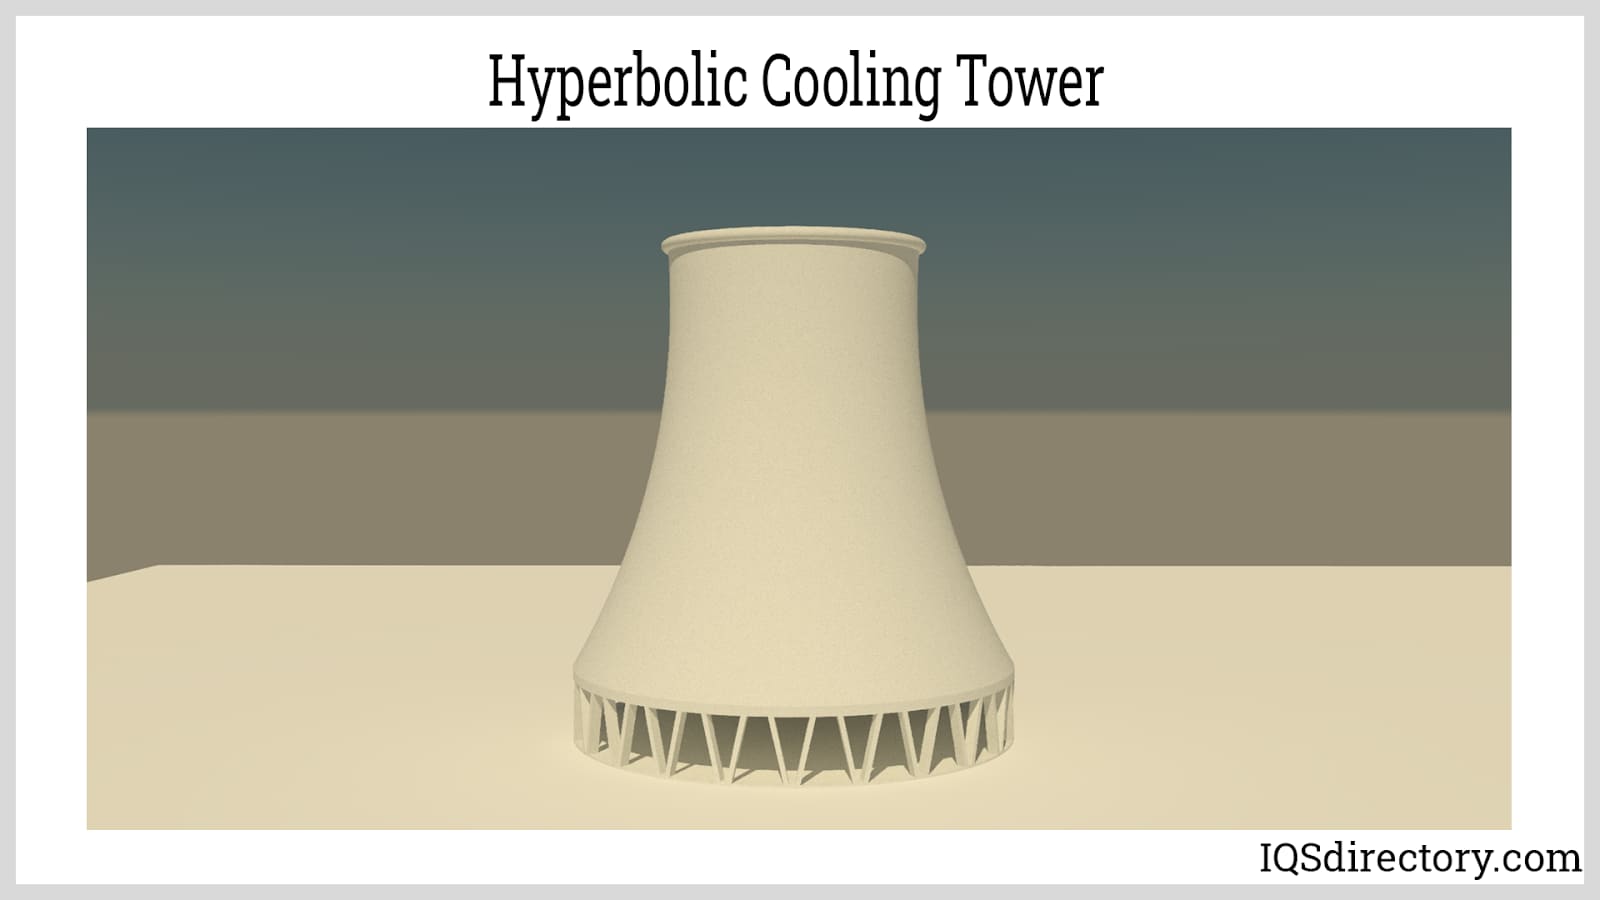 Hyperbolic Cooling Tower